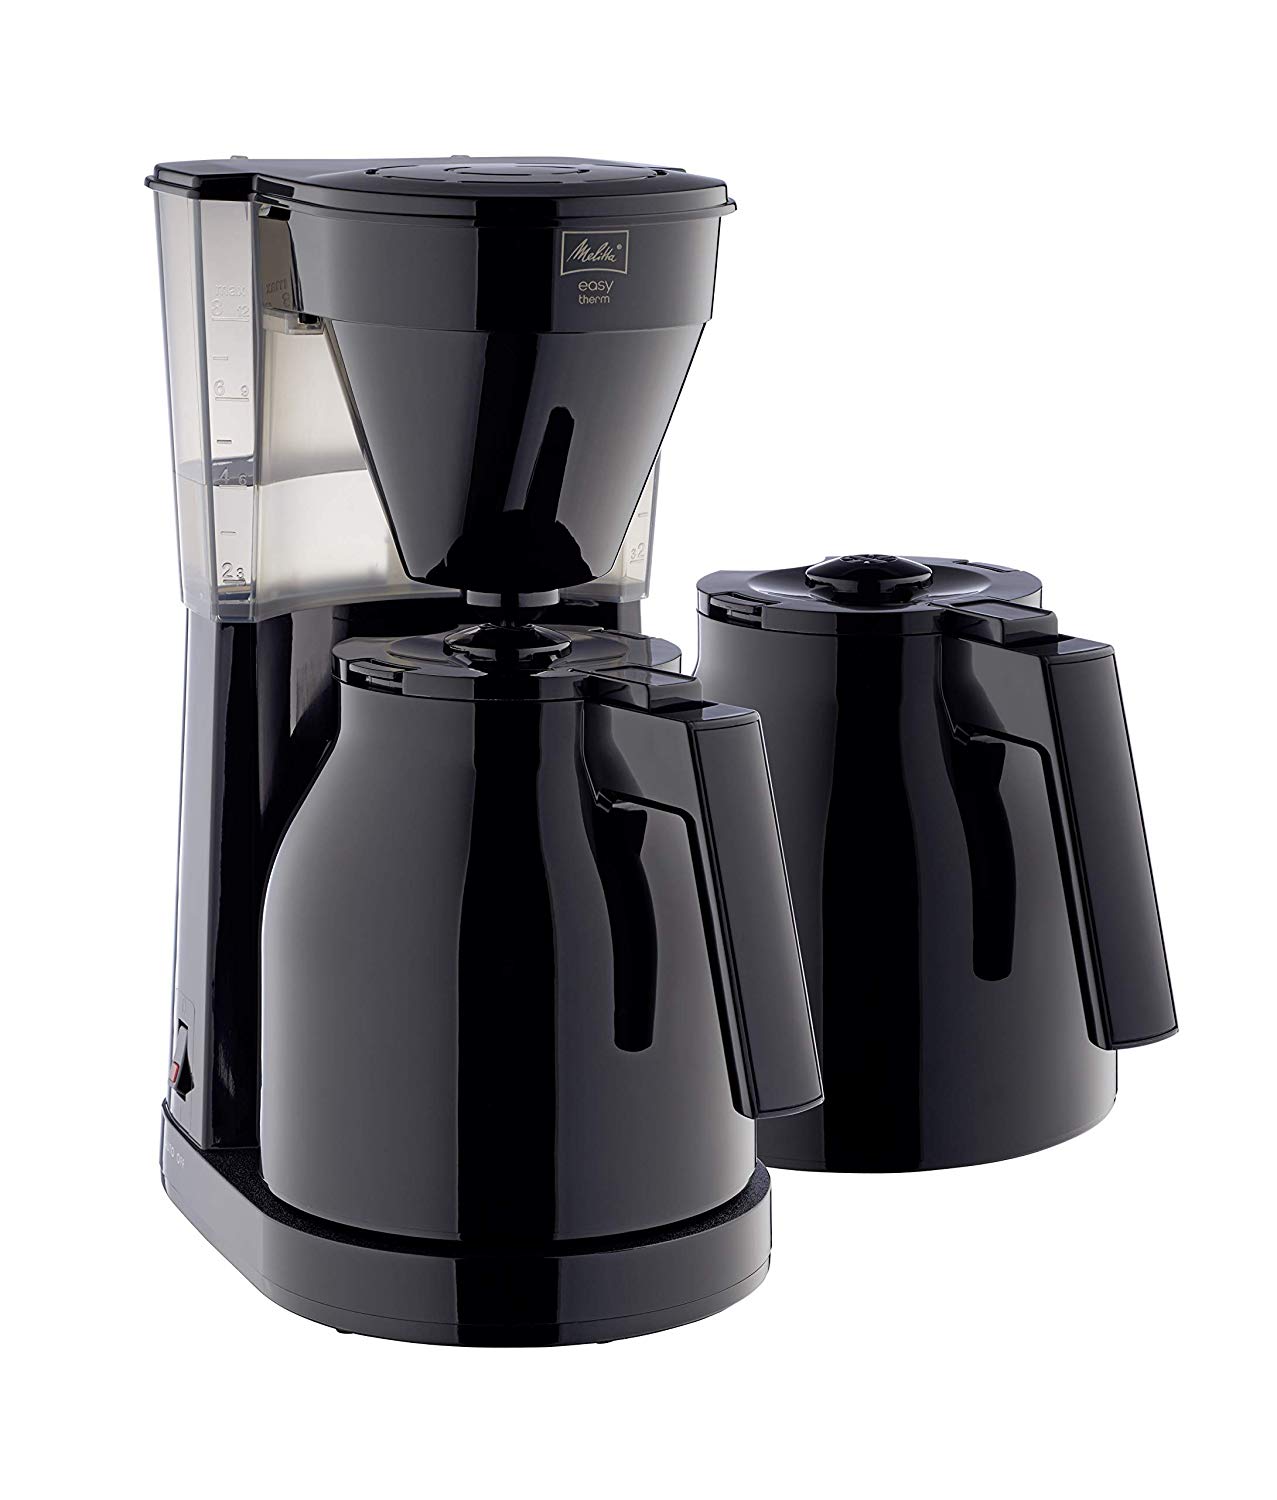 Melitta Easy Therm Filter Coffee Maker, Compact Design, Customisable